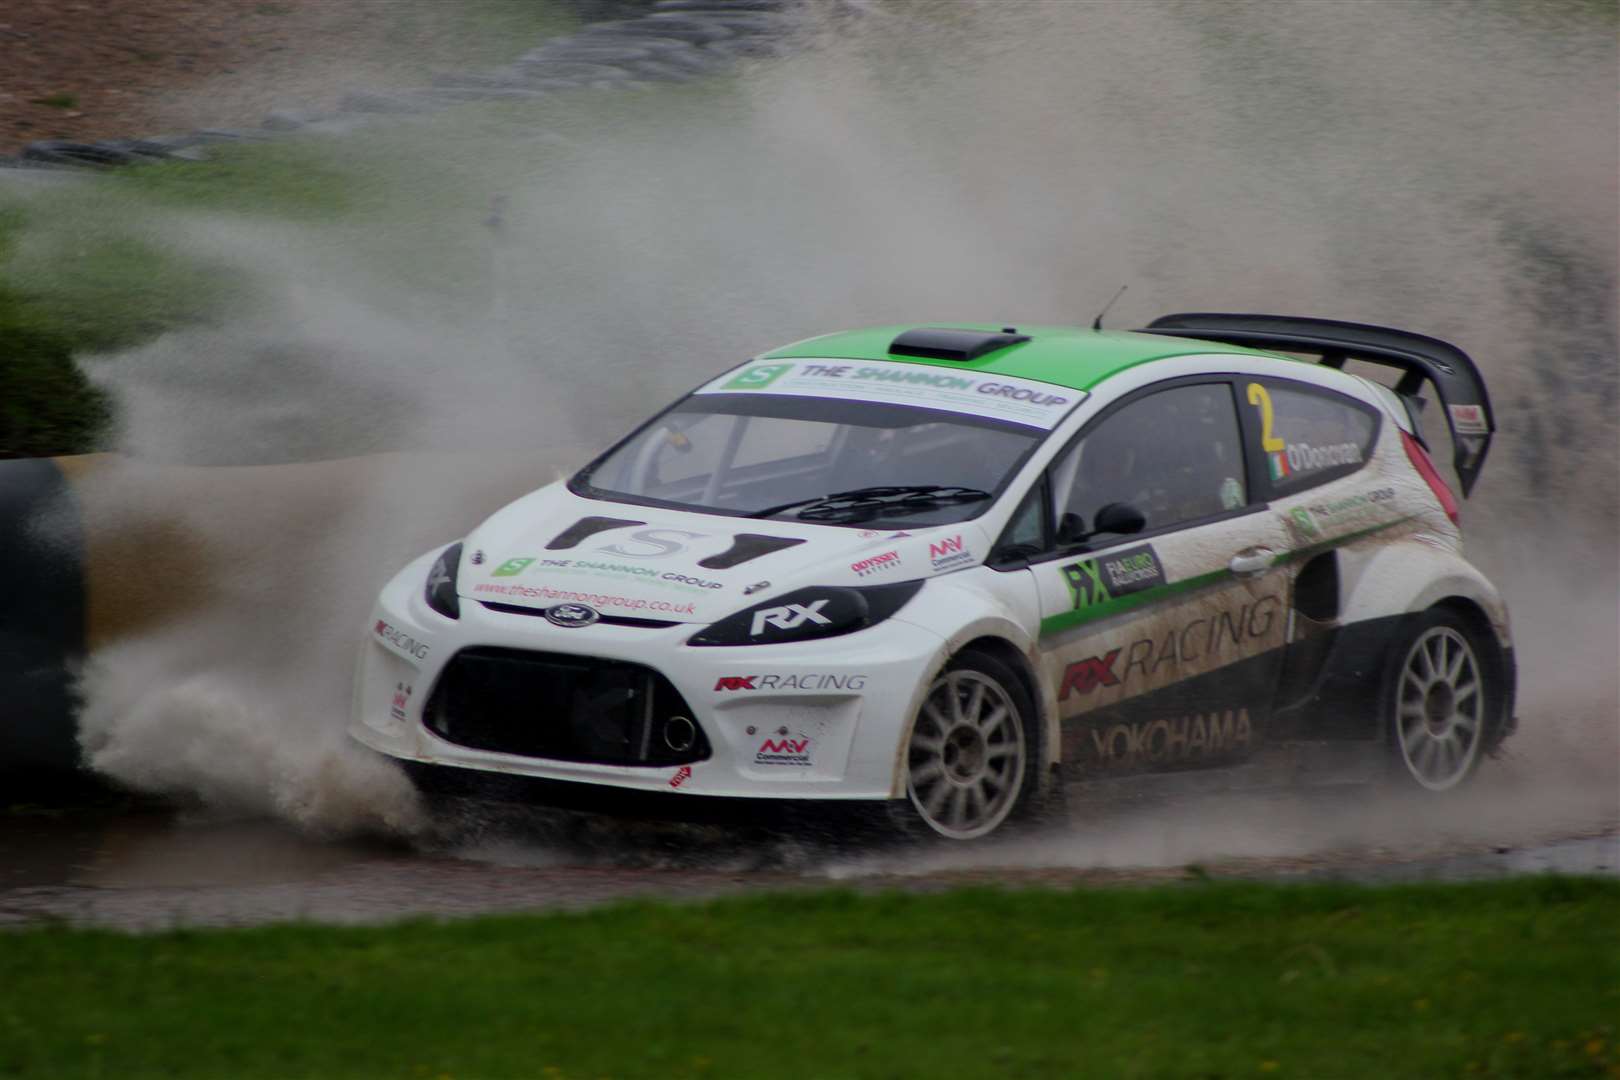 O'Donovan said he was "untouchable" in the wet. Picture: Joe Wright